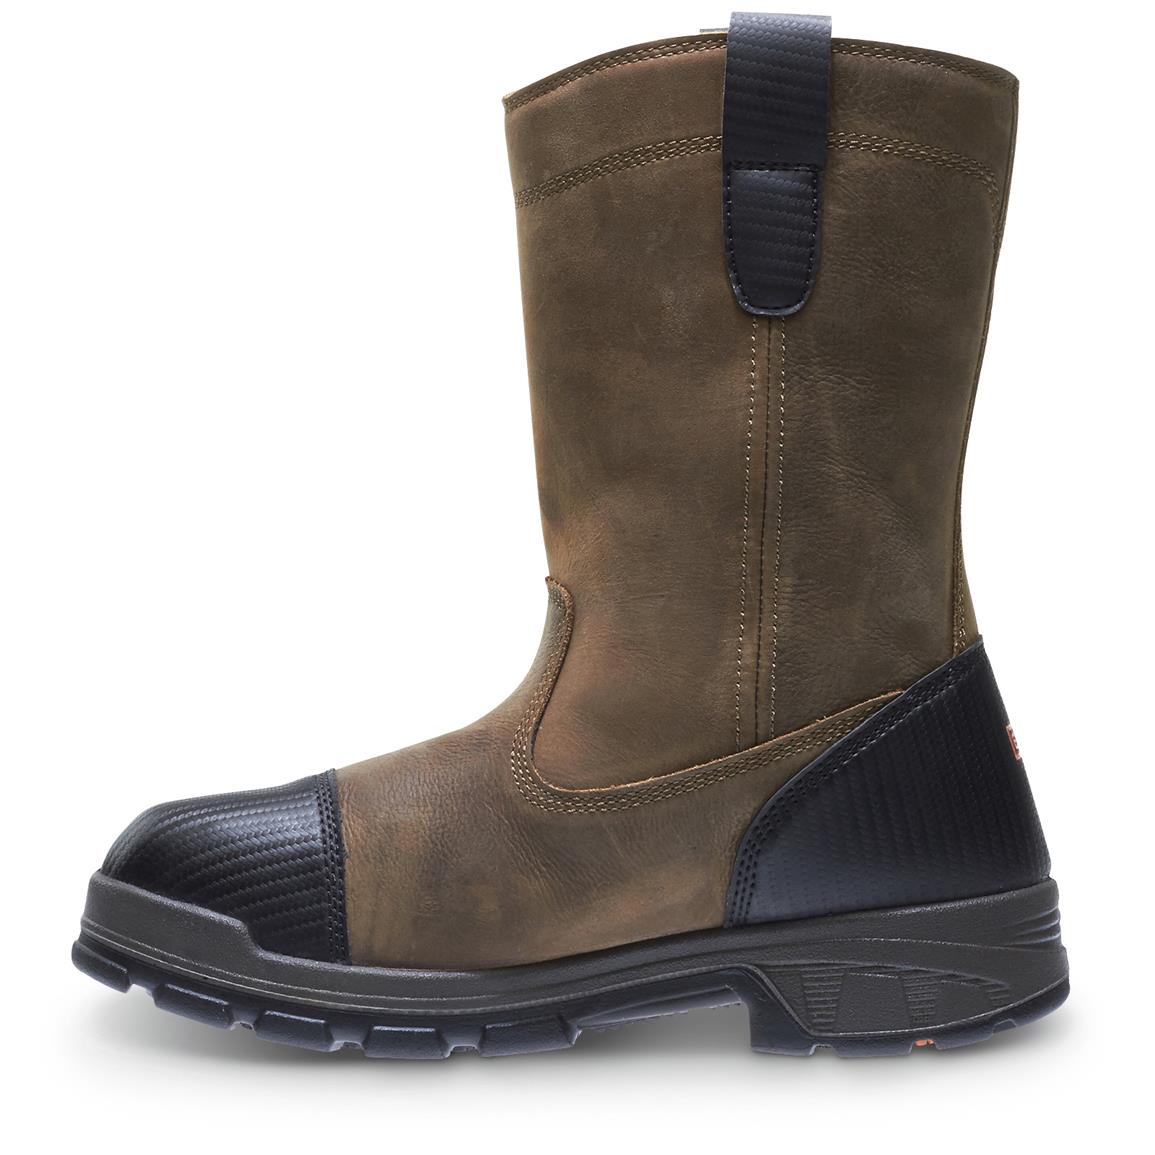 Composite Shank Boots | Sportsman's Guide